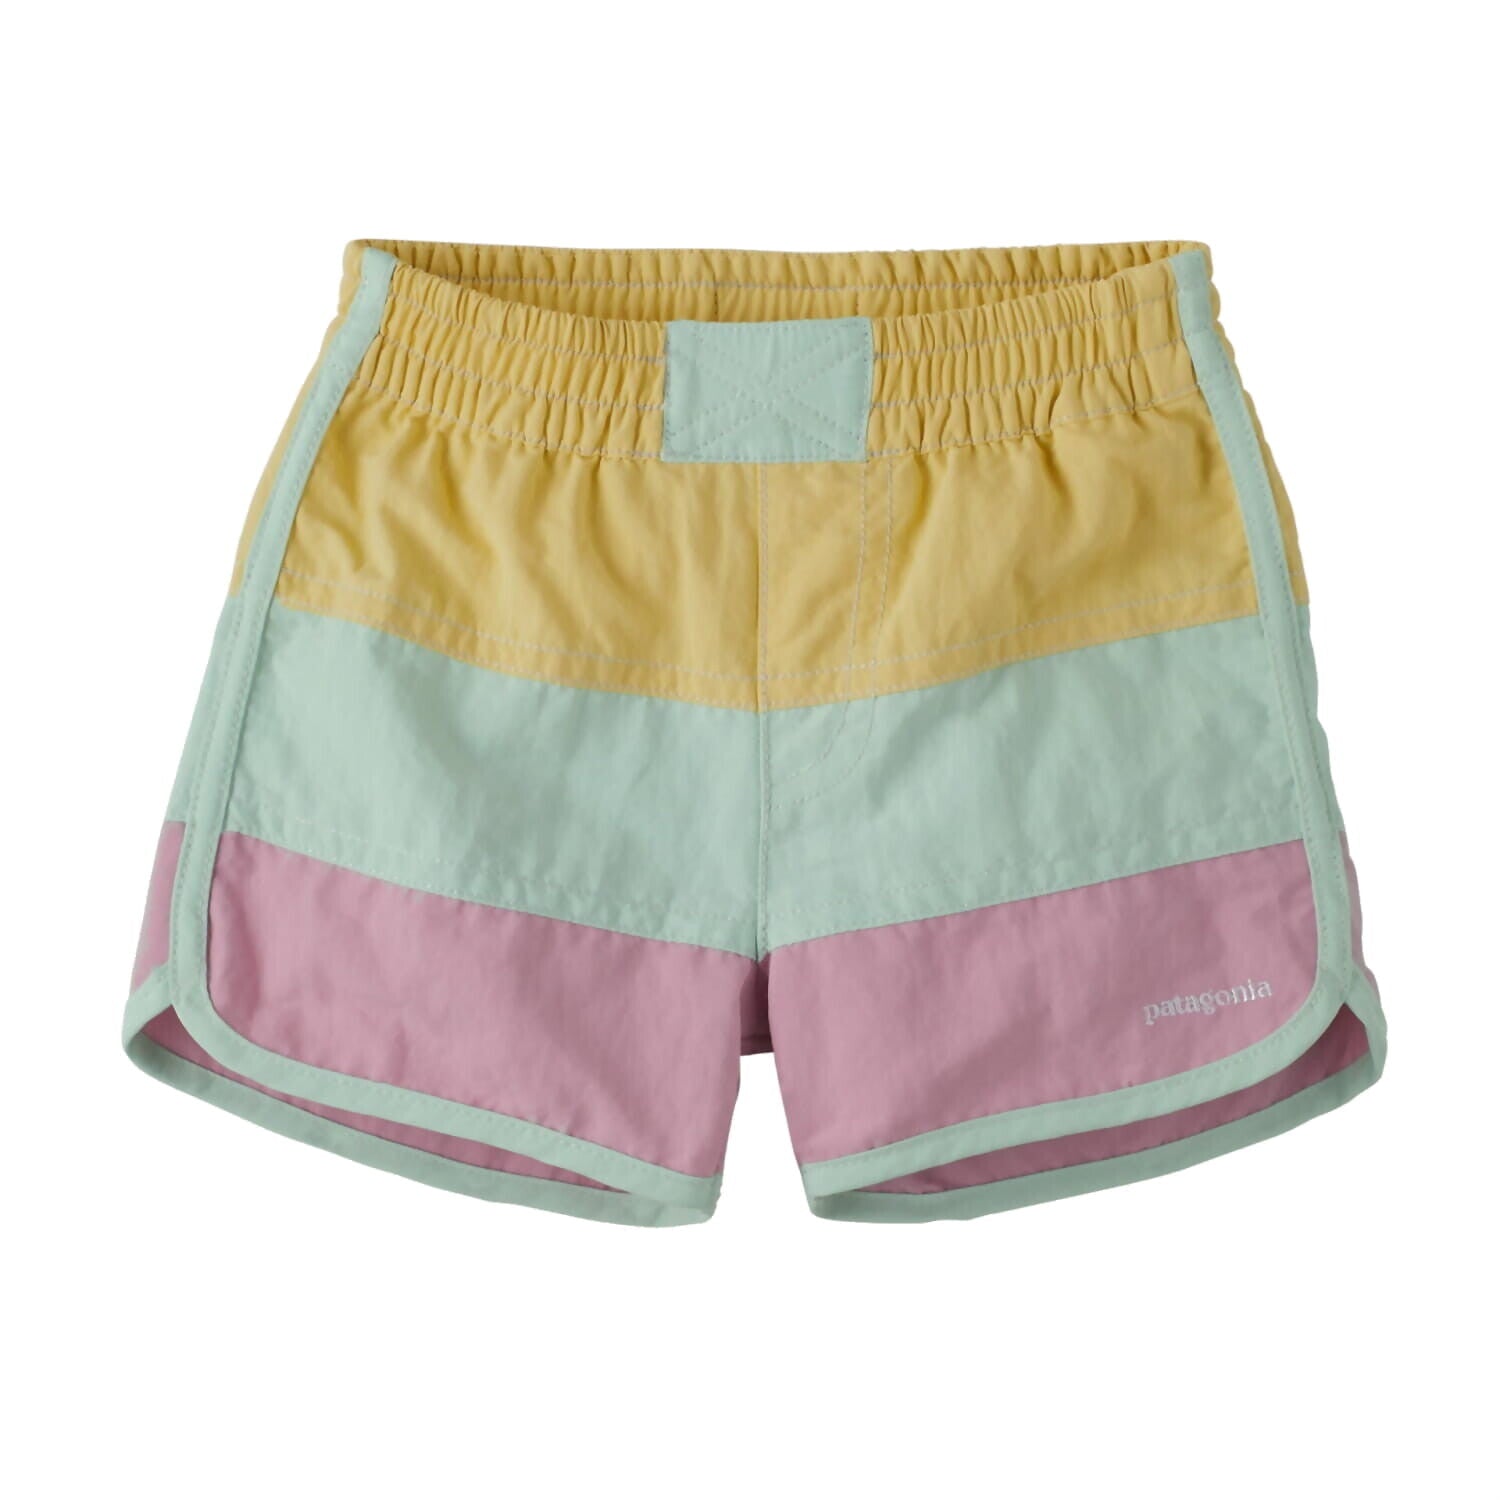 Patagonia Baby Boardshorts shown in the Milled Yellow color.